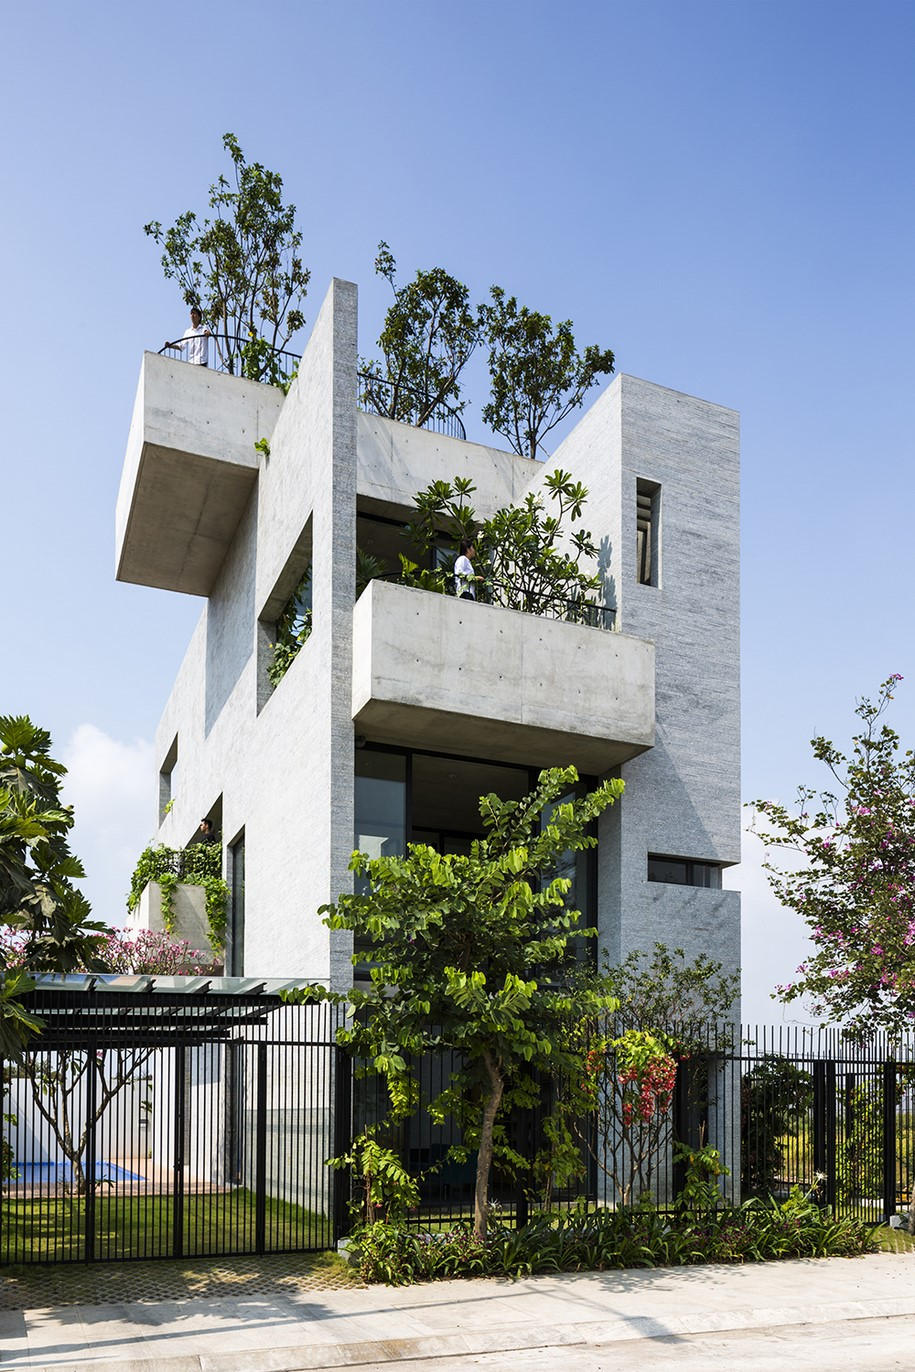 tropical, greenery, plants, concrete, exotic, brutalism, modernism, Vo Trong Nghia Architects, binh house, residence, roof, sustainability